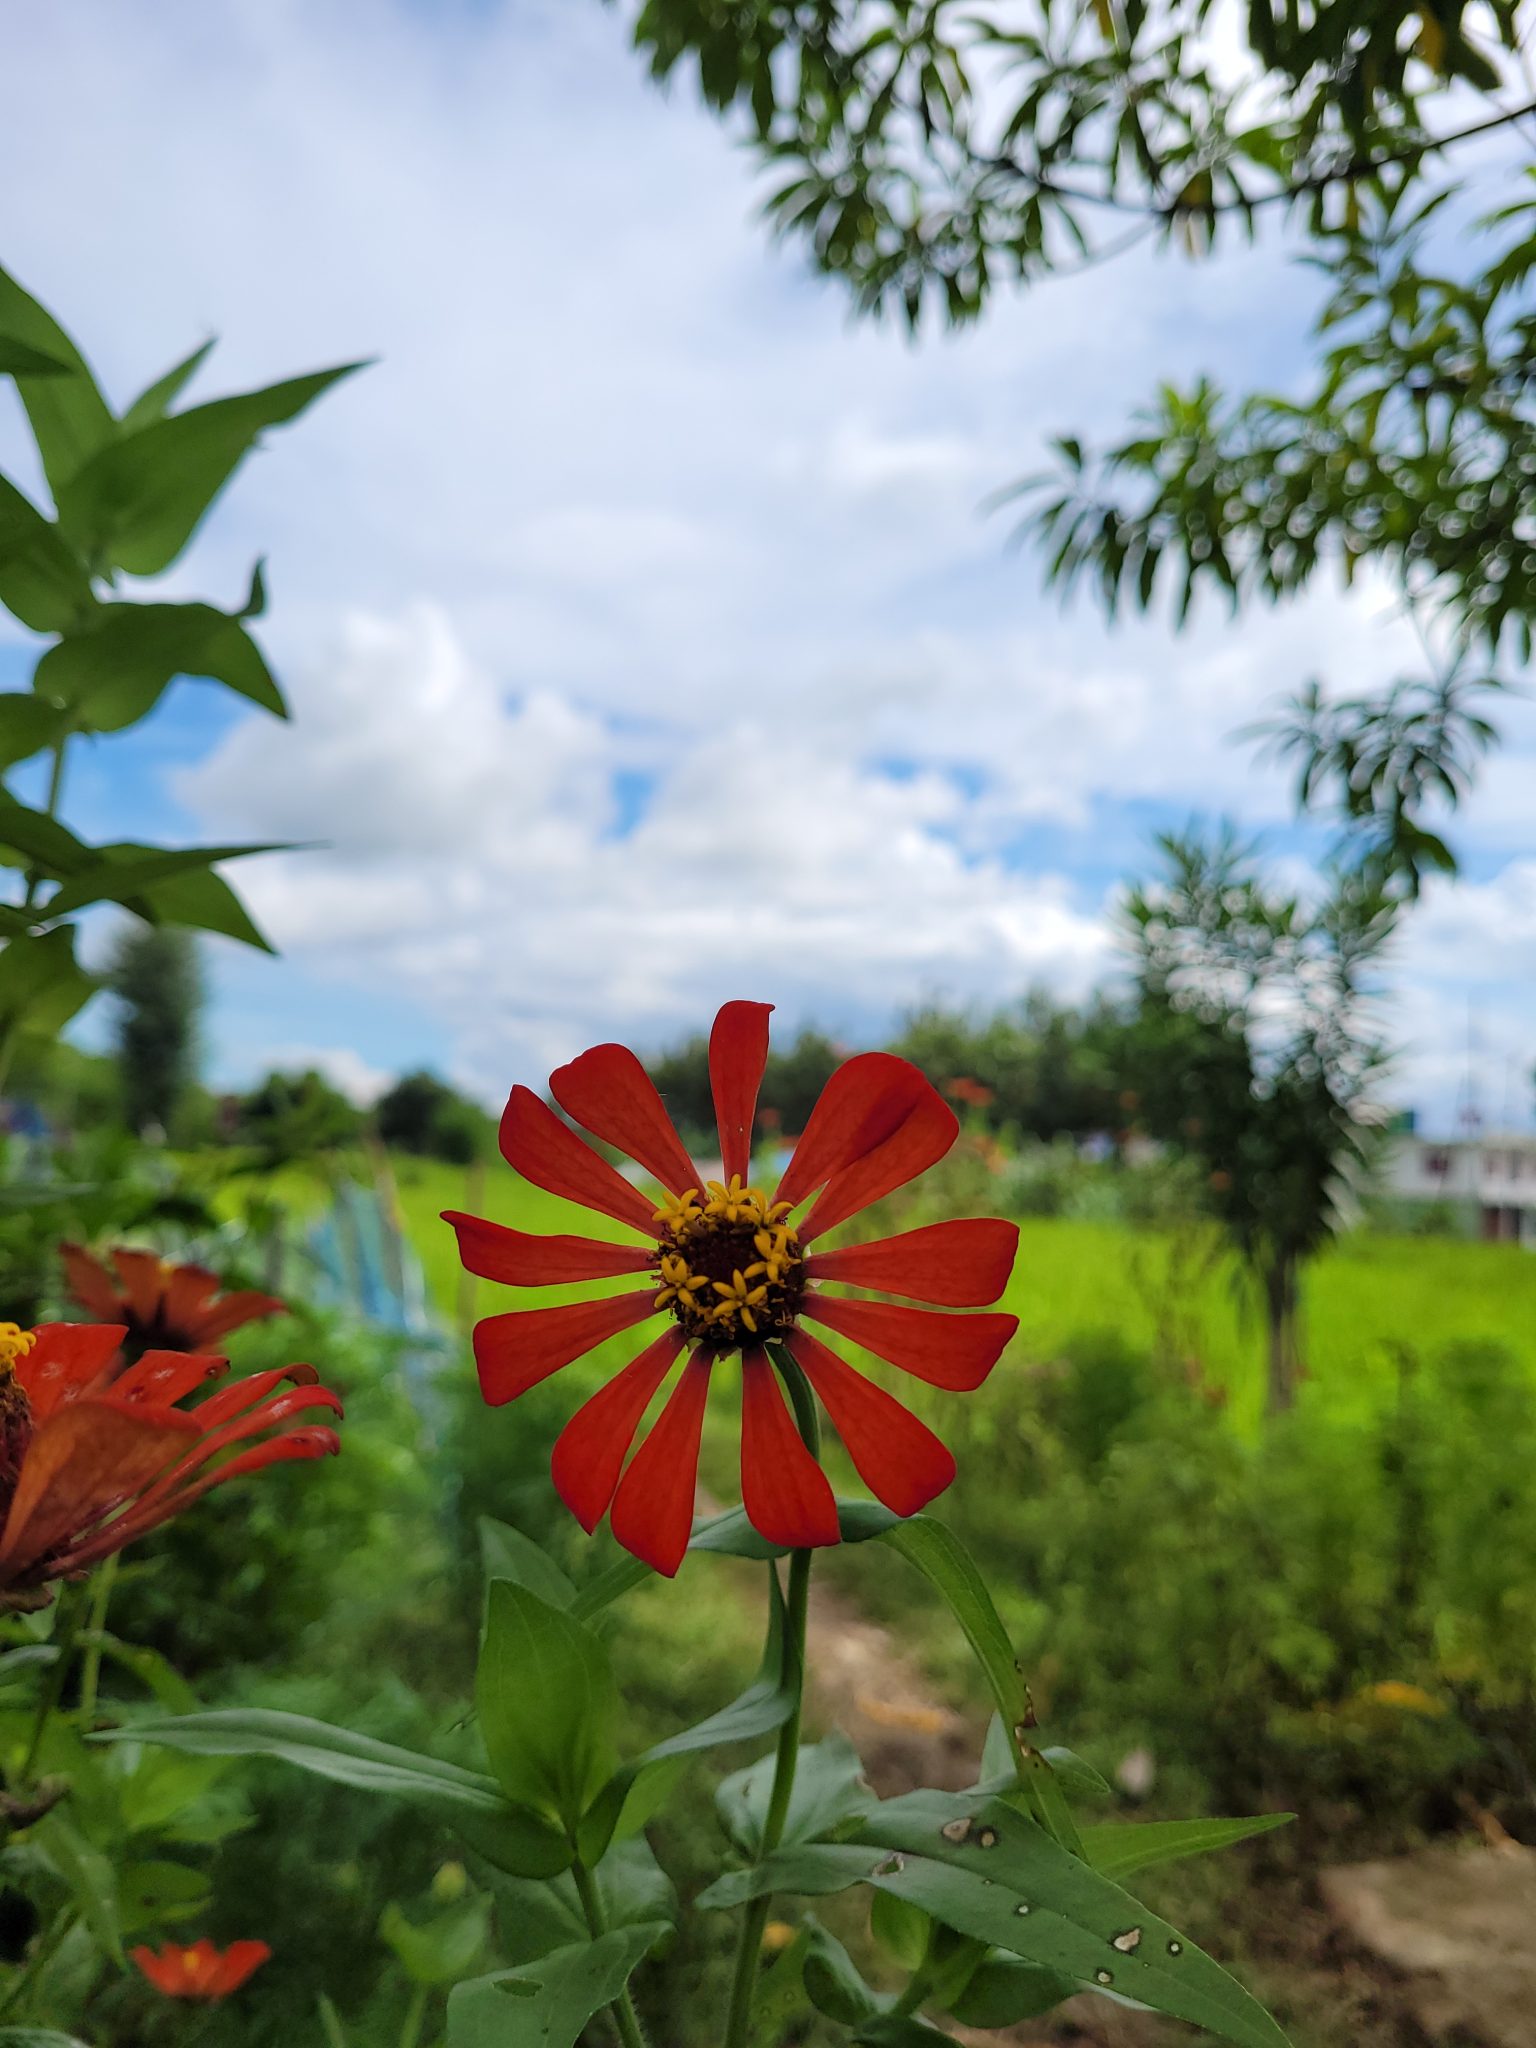 Orange Flower, Blurry Paddy Field and Cloudy Sky on Background